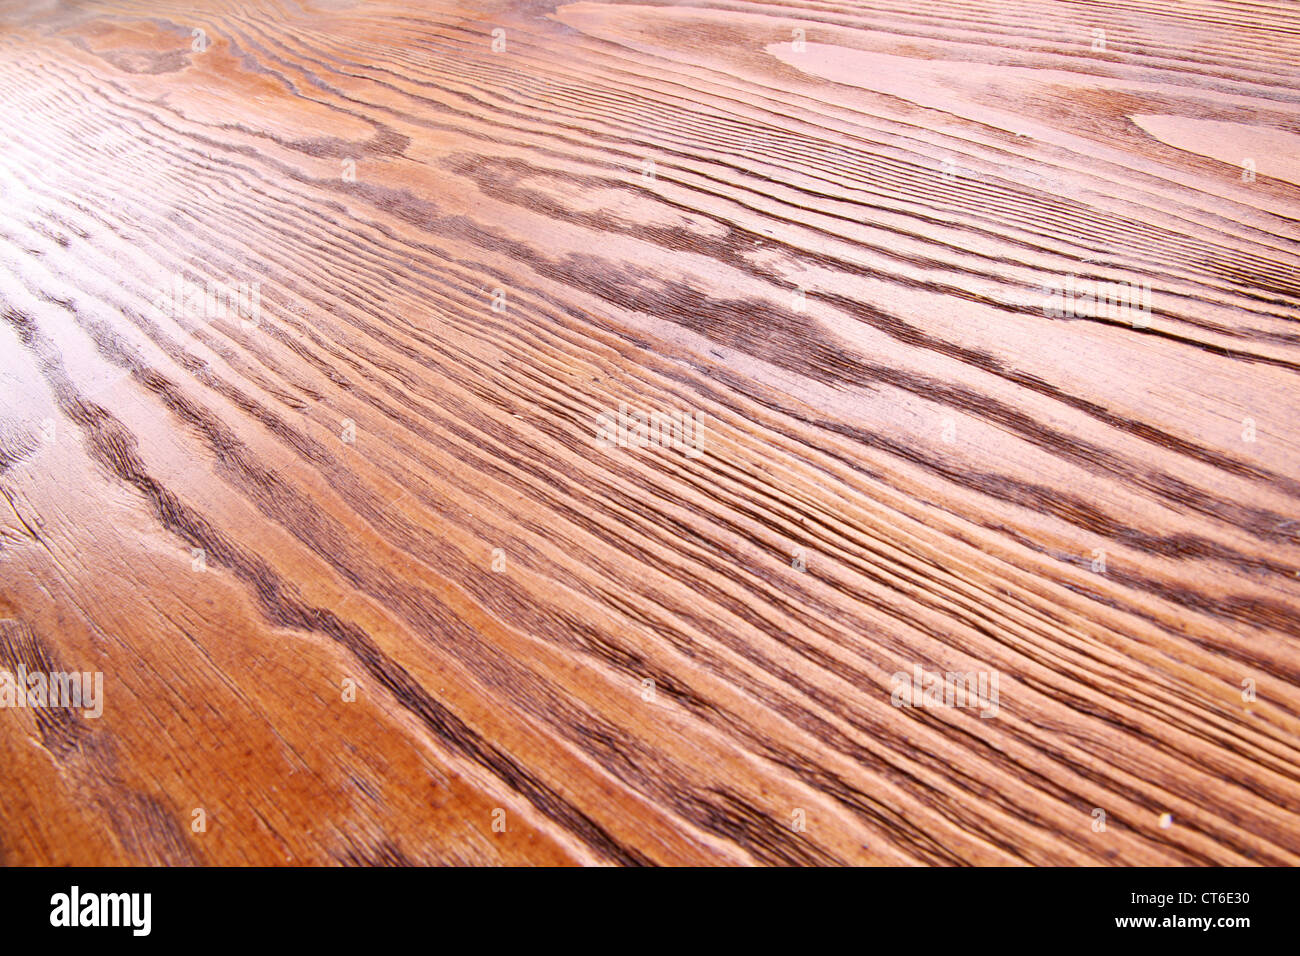 Wooden background. Wood aged and very textured. Stock Photo